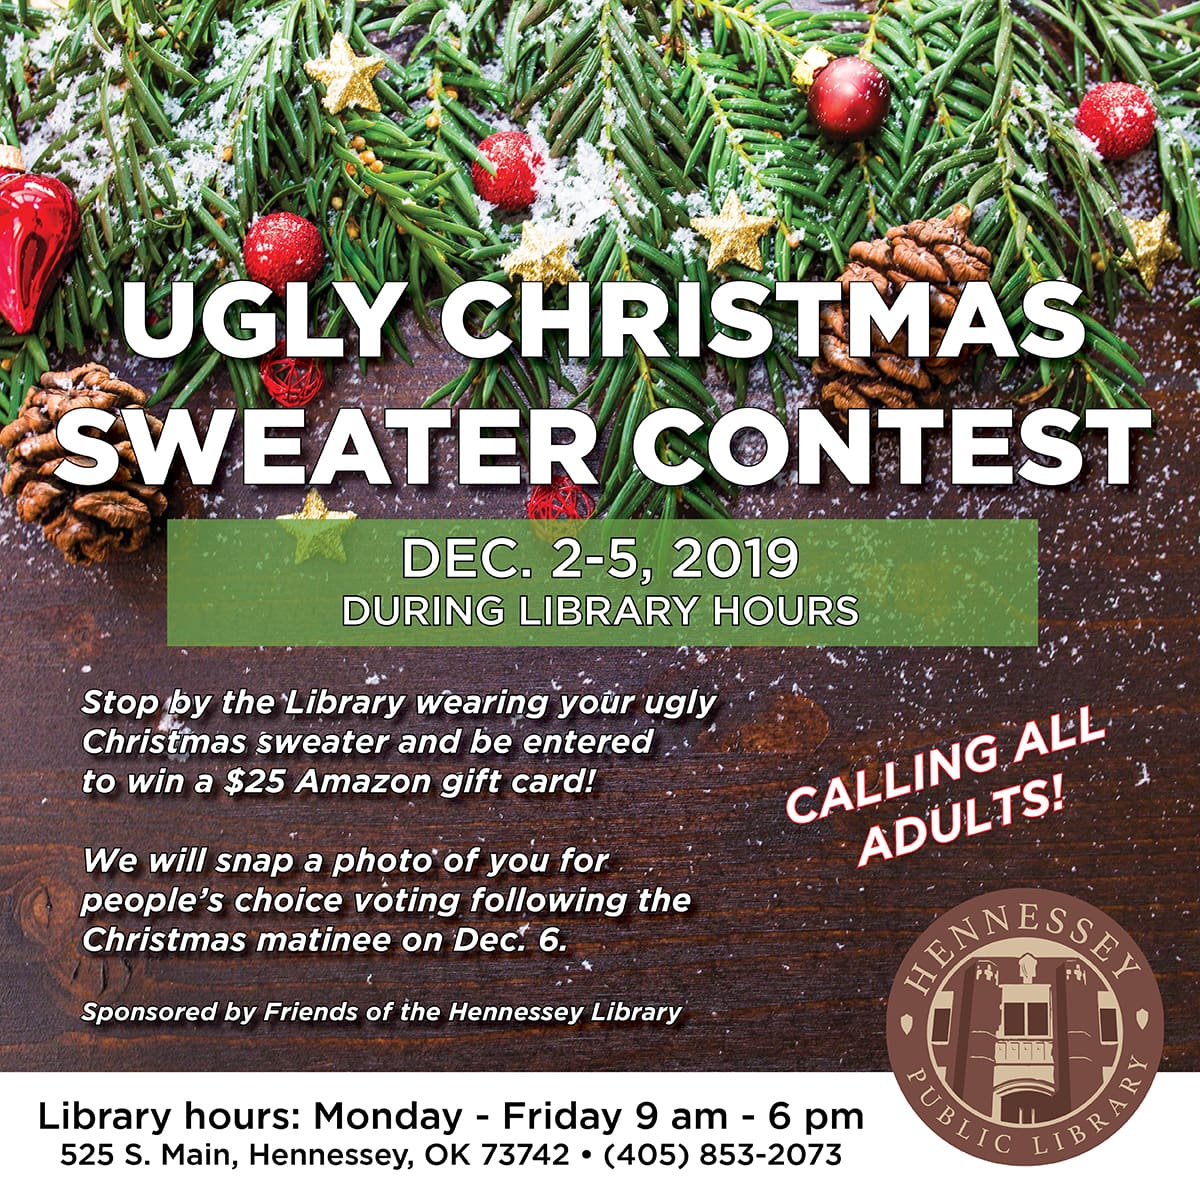 UGLY SWEATER CONTEST AT THE LIBRARY